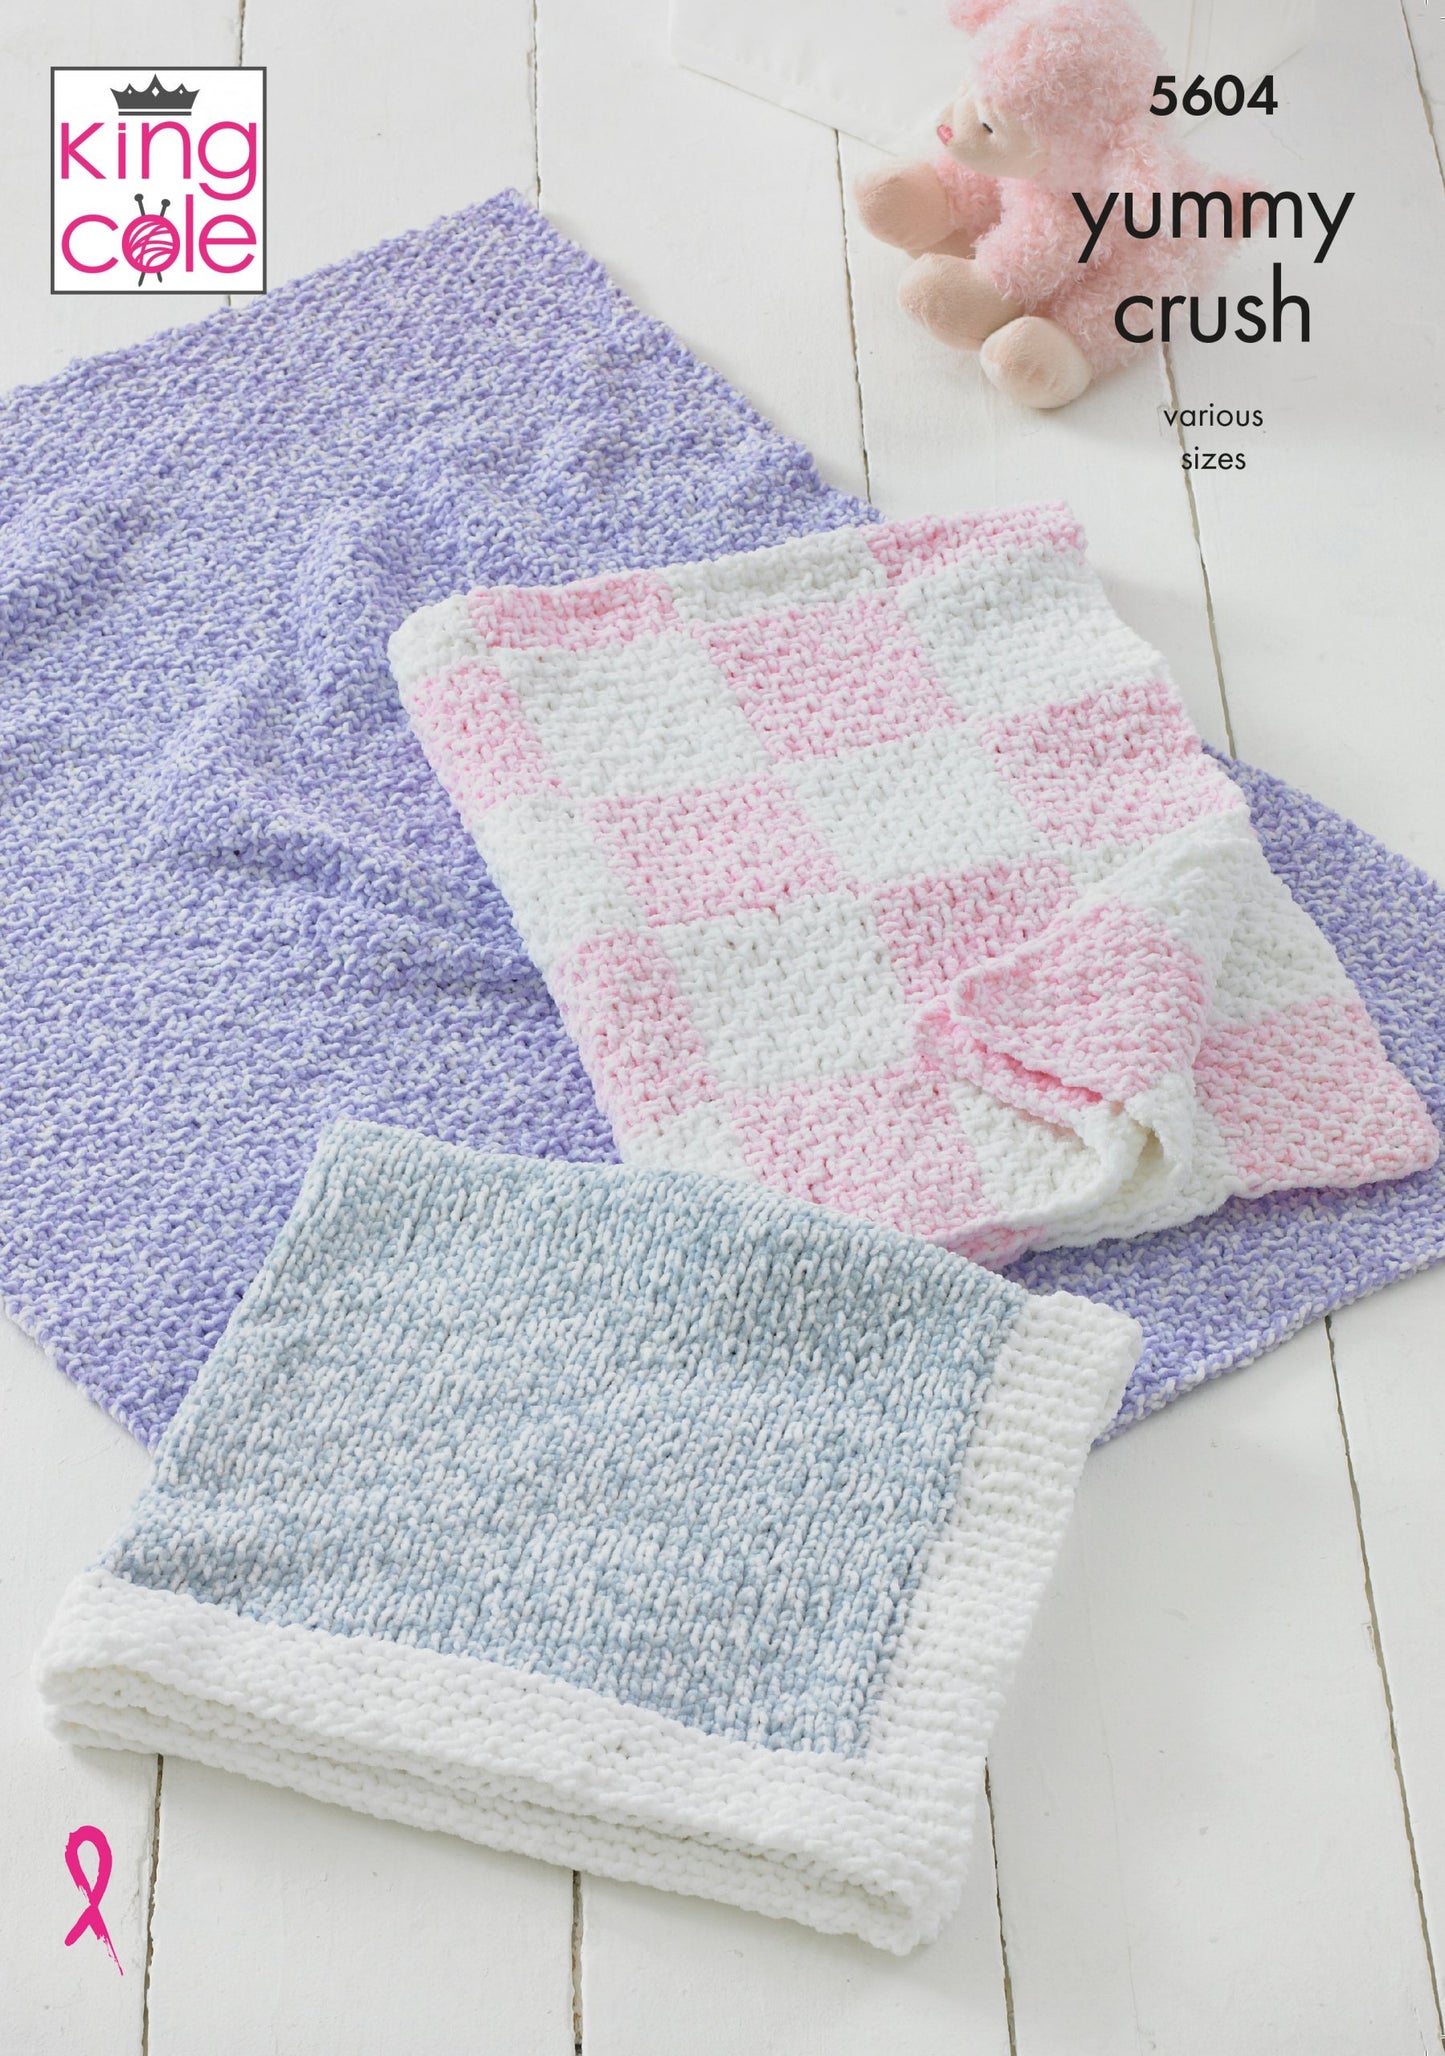 Knitting Pattern 5604 - Blankets Knitted in Yummy Crush